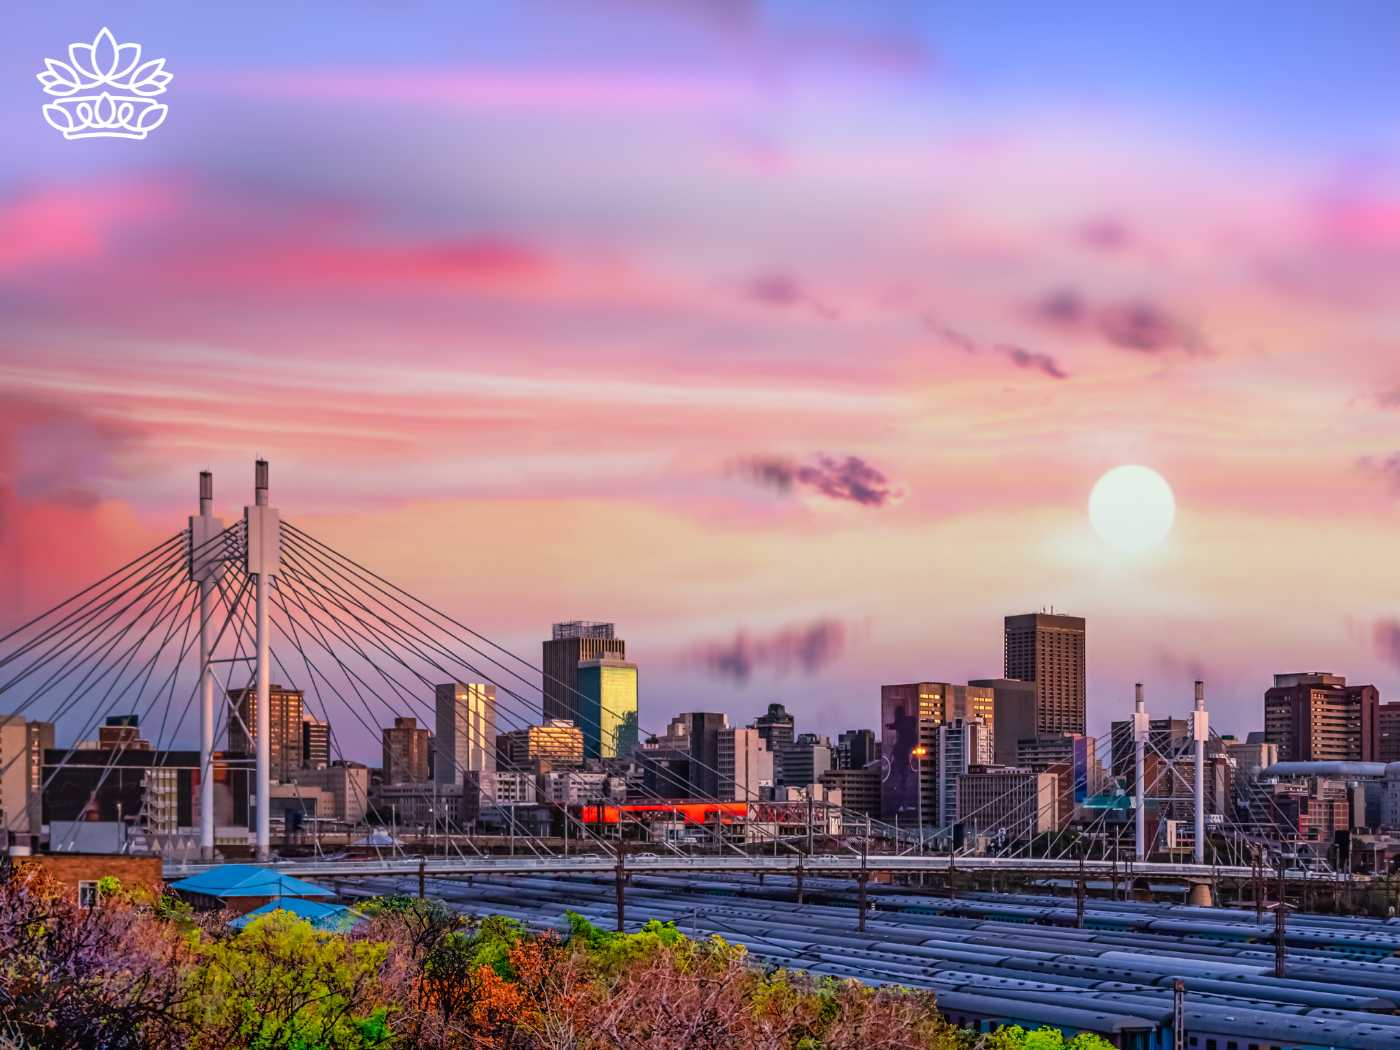 Stunning sunset view over Johannesburg, showcasing the cityscape with the iconic bridge, ideal for the Johannesburg Gift Delivery Collection. Offering same day delivery of beautiful flowers, gifts, and hampers, reflecting kindness and thoughtful gift ideas for every occasion. Fabulous Flowers and Gifts.